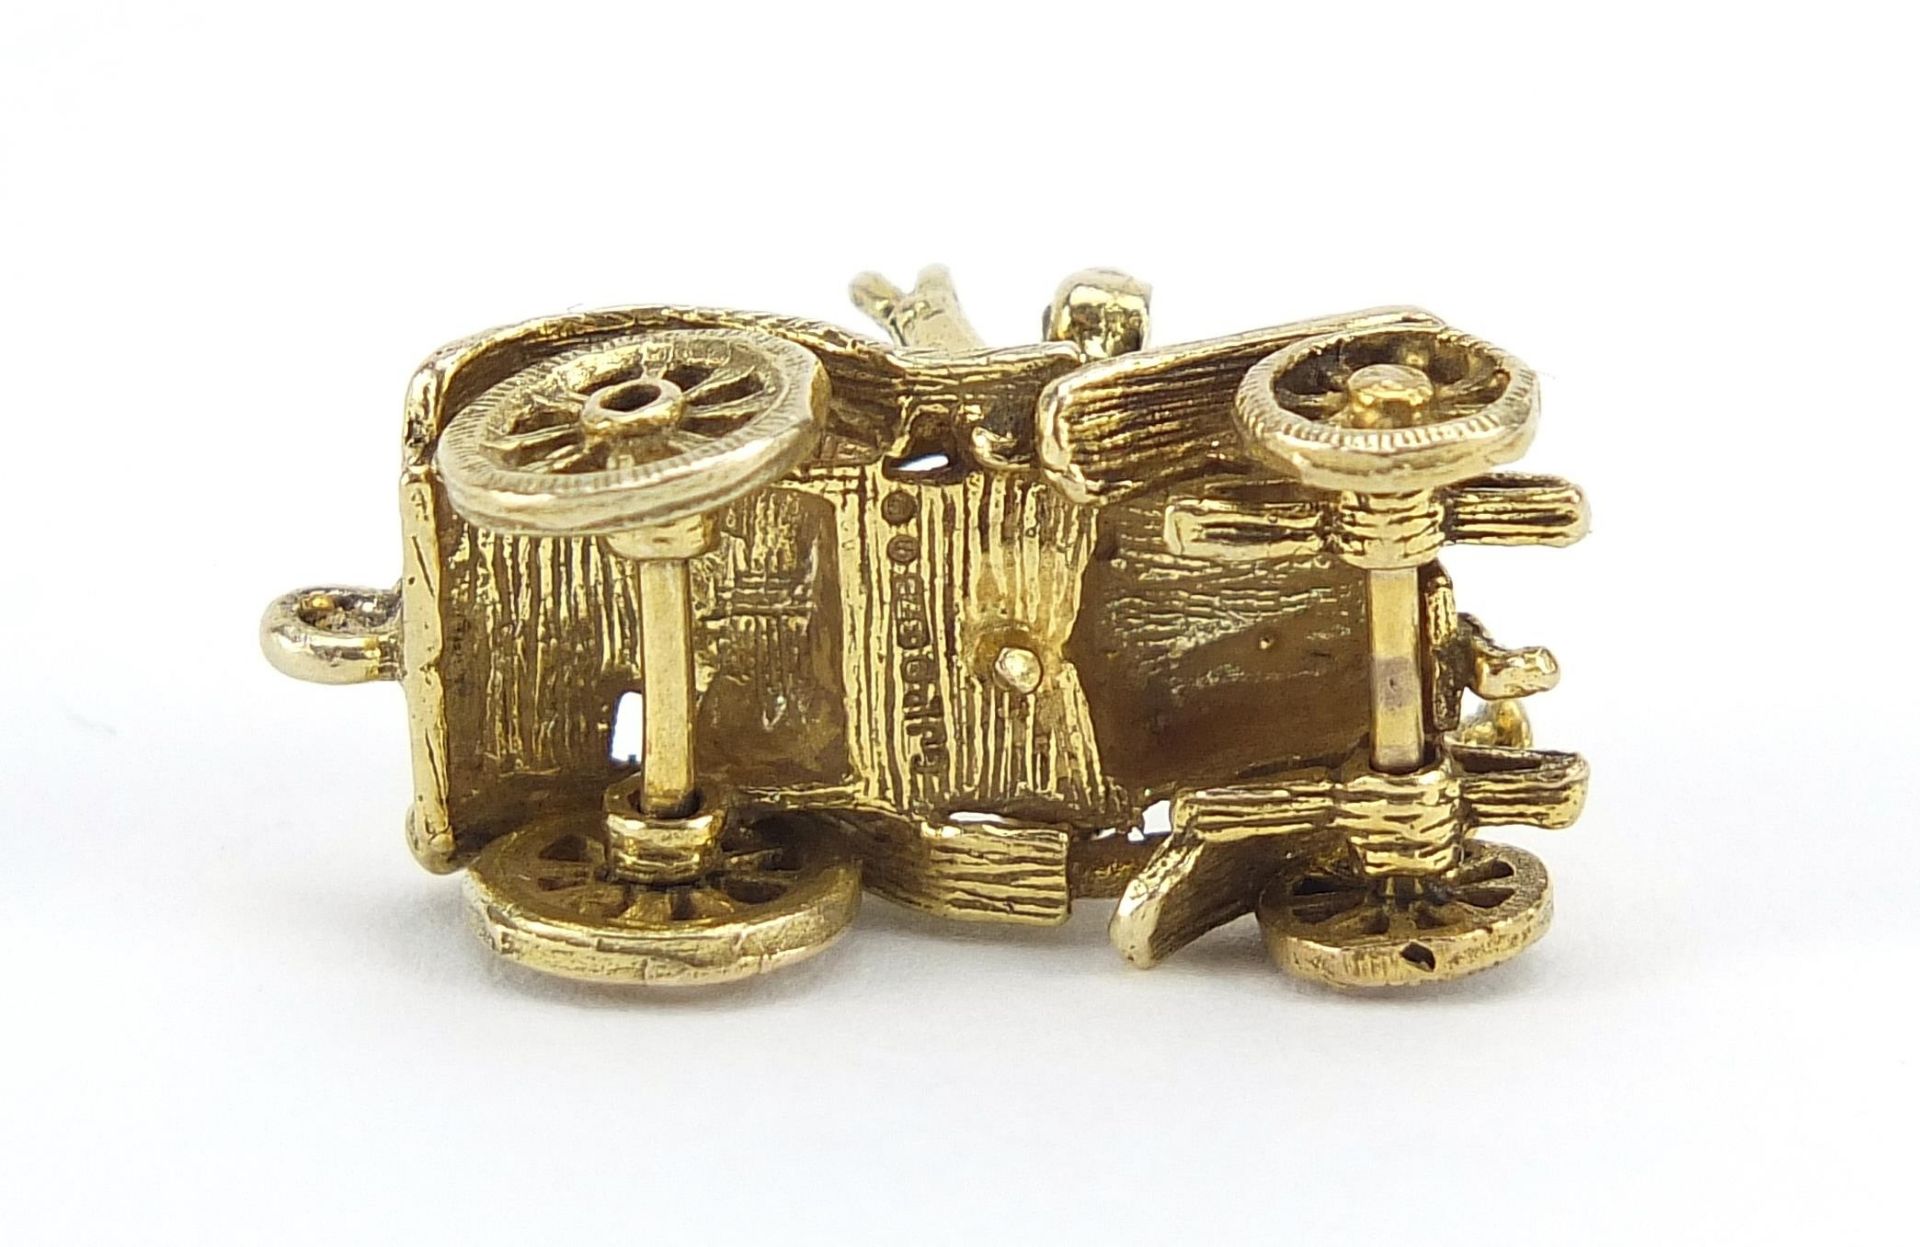 9ct gold classic car charm, 2.2cm in length, 4.5g - Image 3 of 4